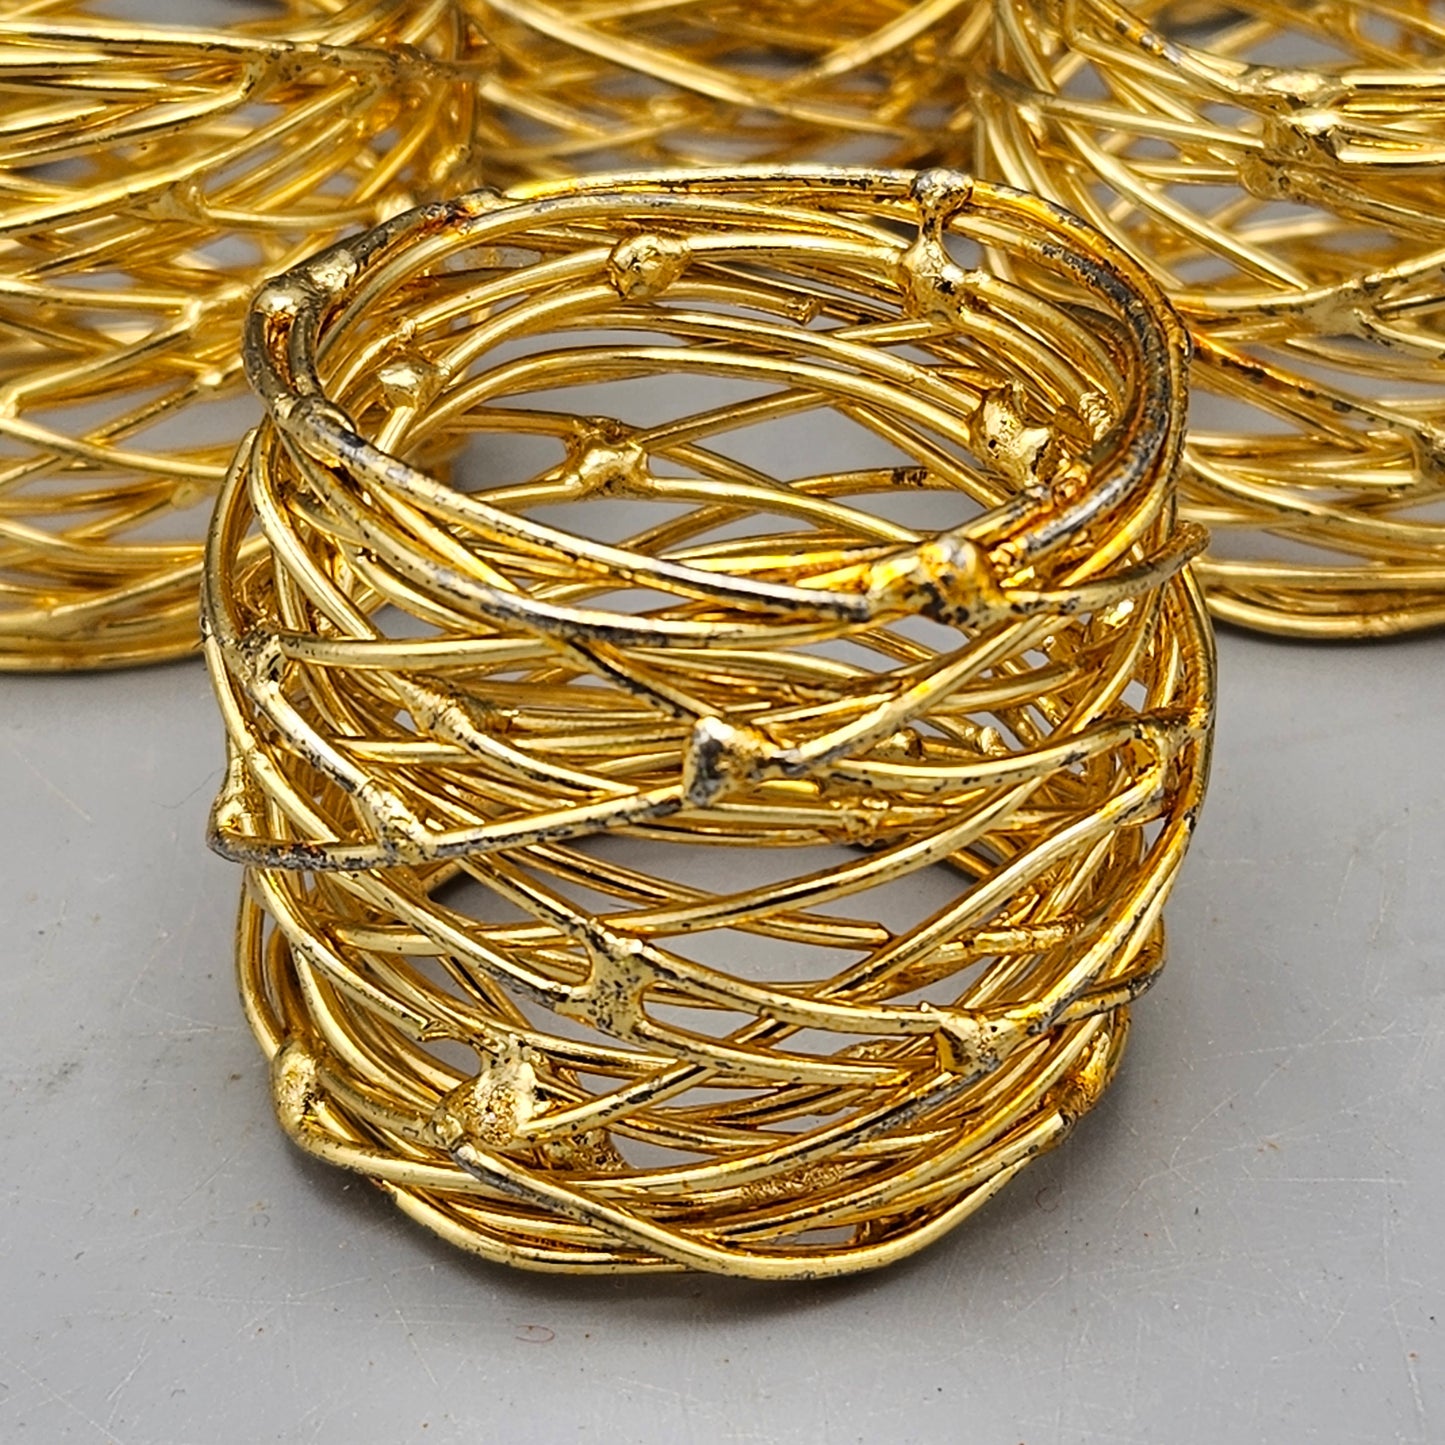 Gold Wire Napkin Rings - Set of Ten